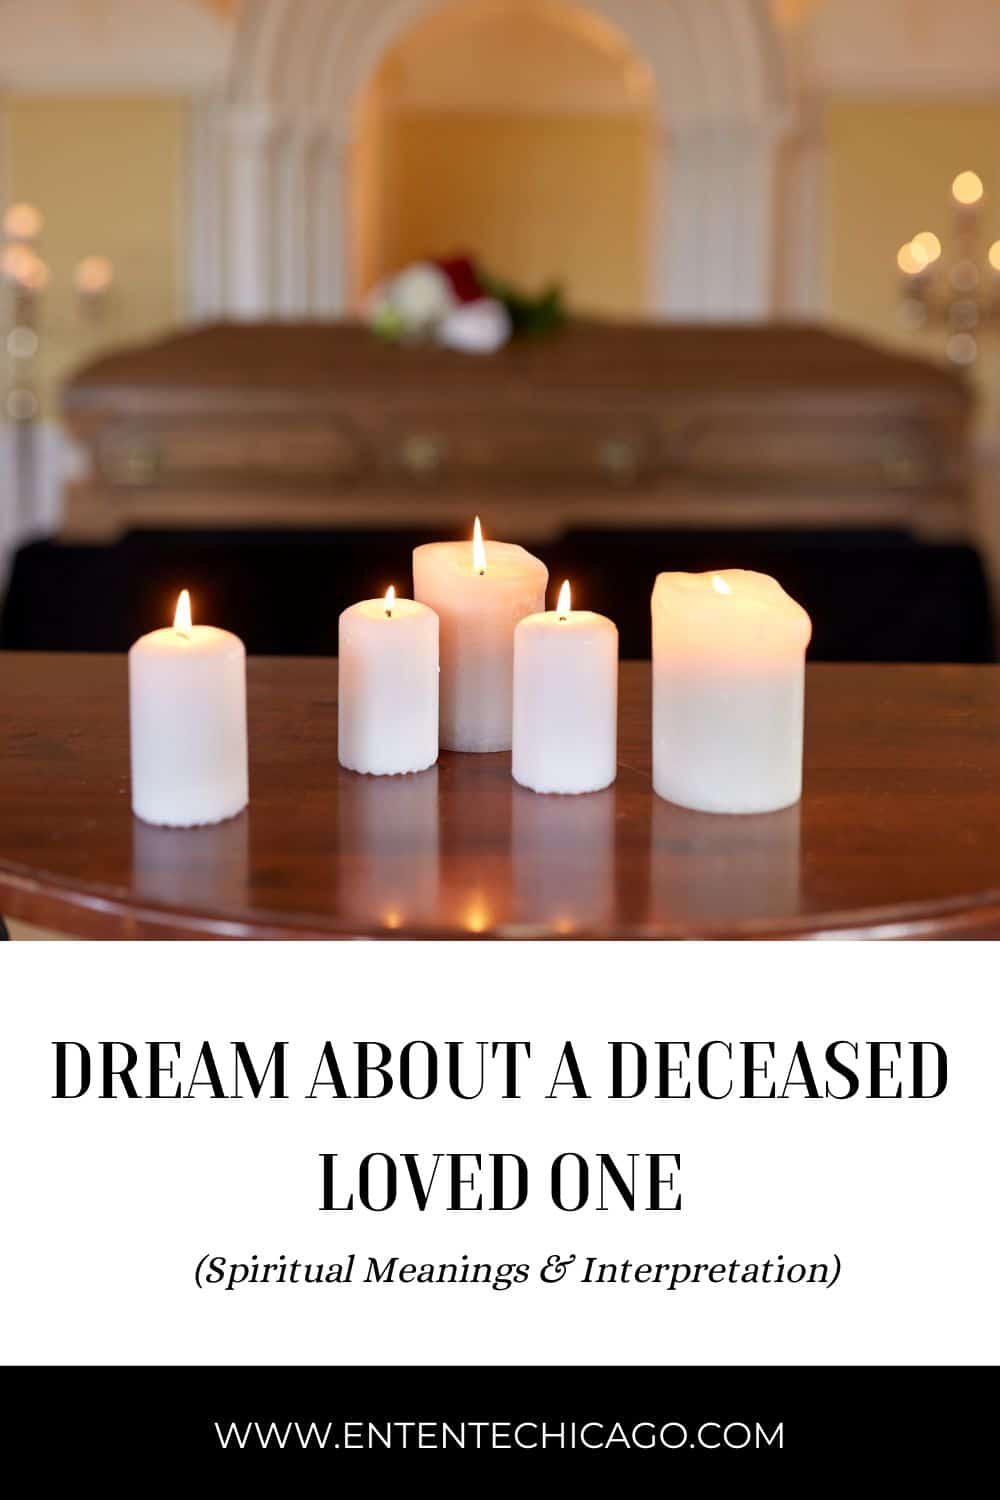 What Does It Mean When You Dream About A Deceased Loved One